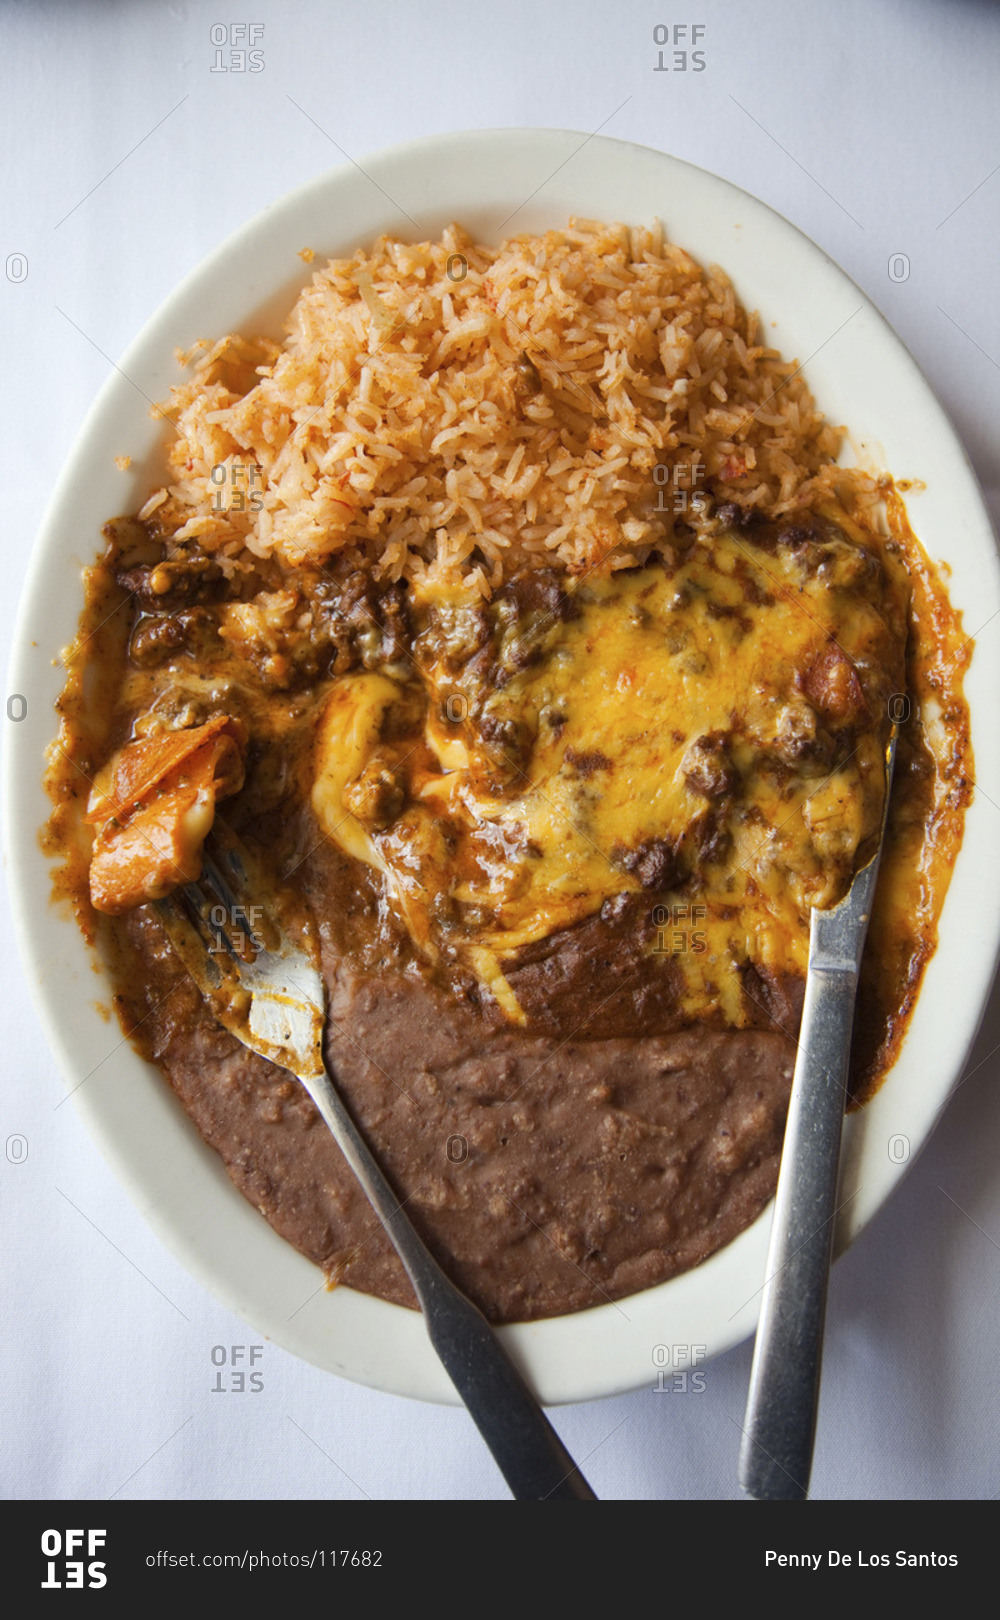 Typical Mexican cheesy dish made from rice and bean puree